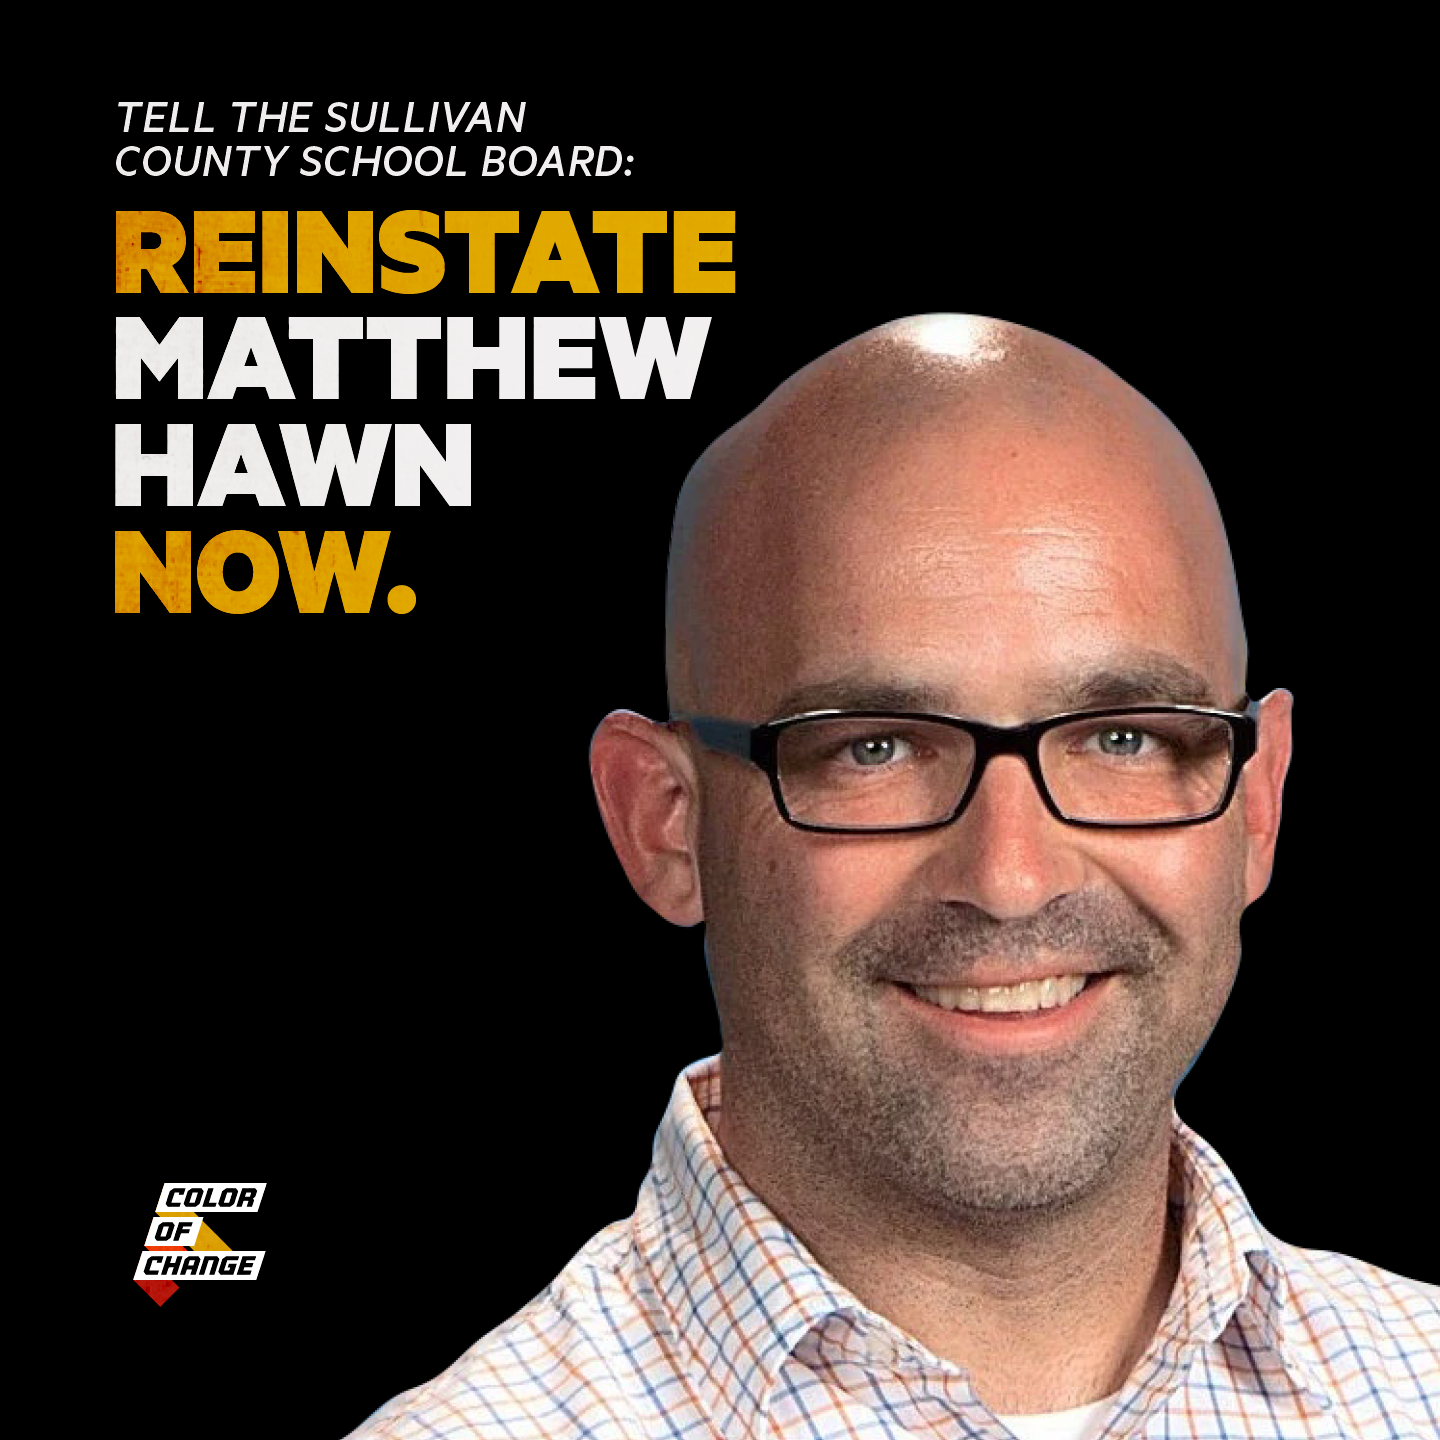 Image of Matthew Hawn's face next to white and yellow text that reads 